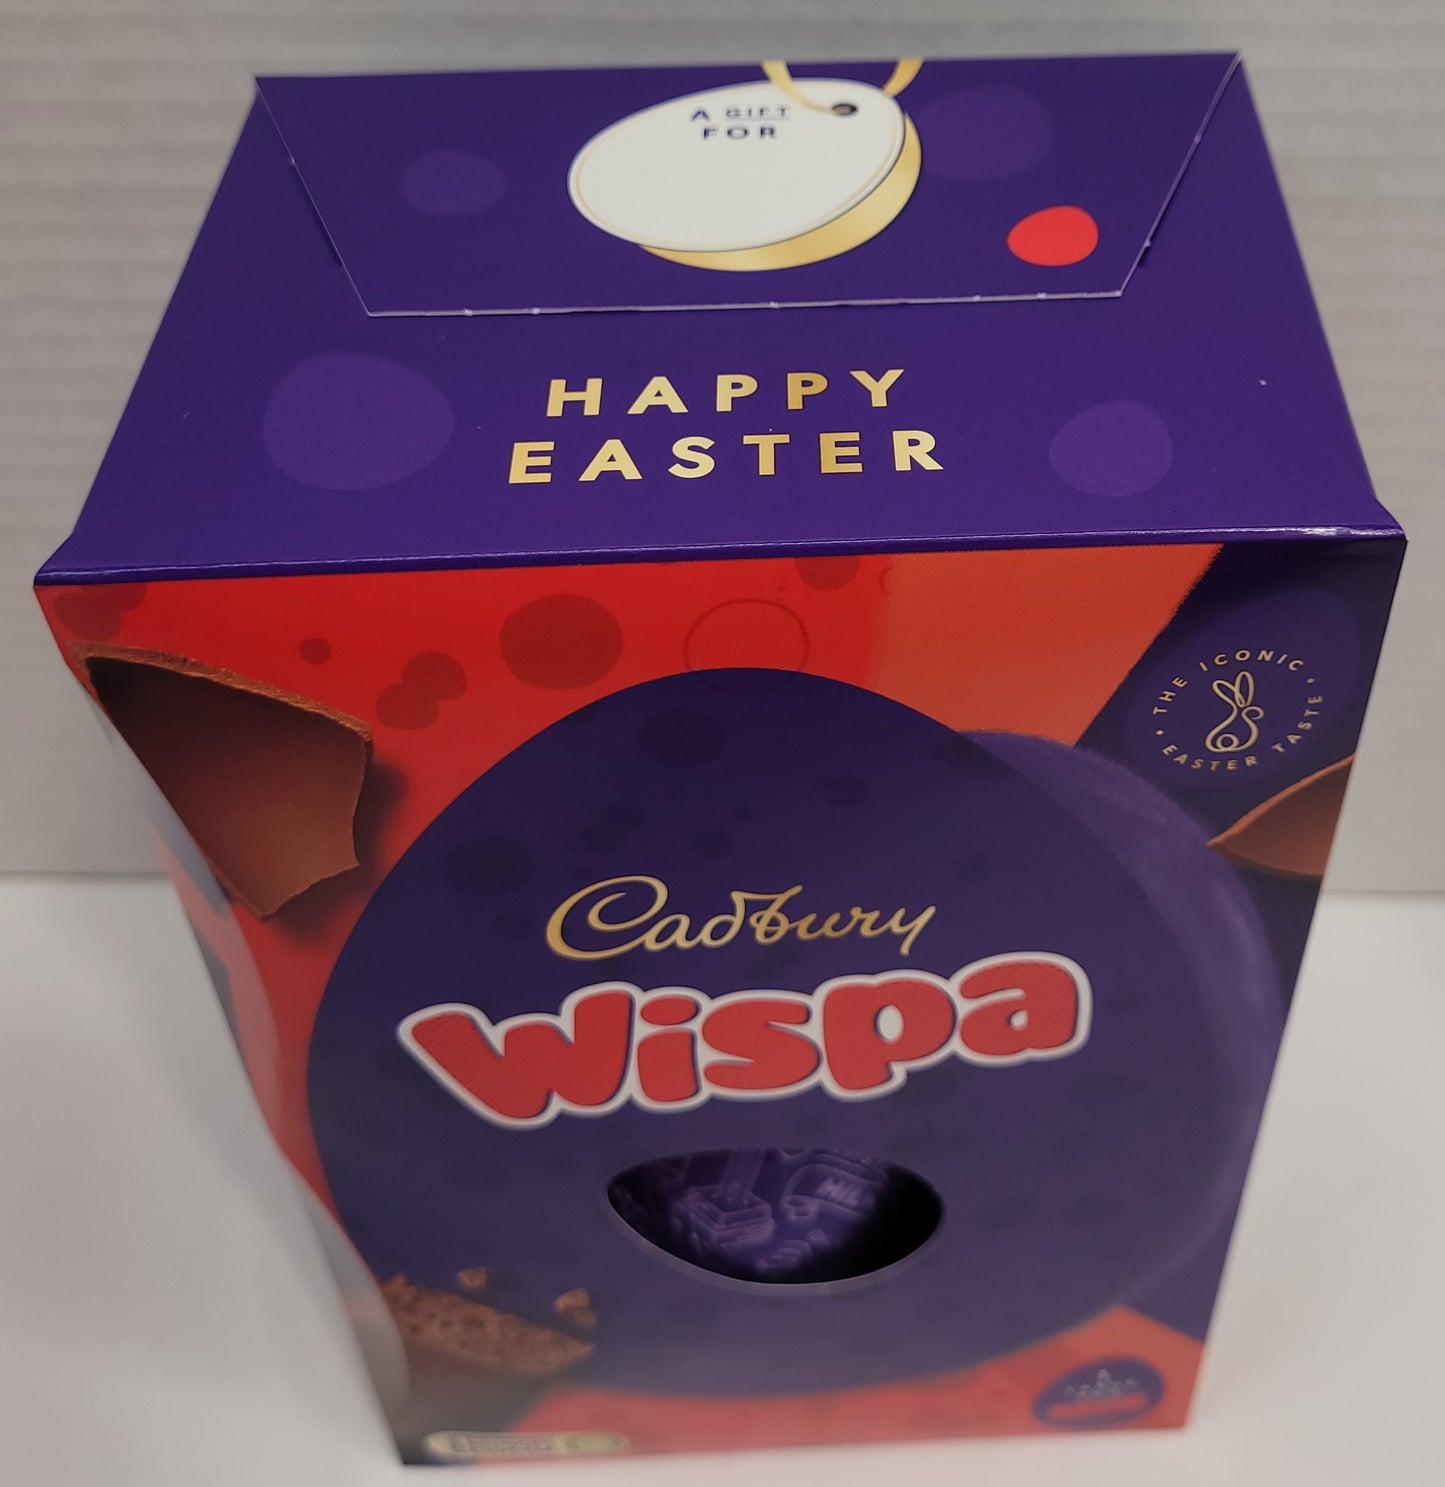 Top view of Box - A yummy hollow chocolate egg made with the world-famous Cadbury Dairy Milk chocolate. The chocolate egg is filled with 1 Cadbury Wispa chocolate bar.   Box contains one Cadbury Dairy Milk hollow chocolate egg and two bars of textured milk chocolate.   152G   Imported from the UK. 